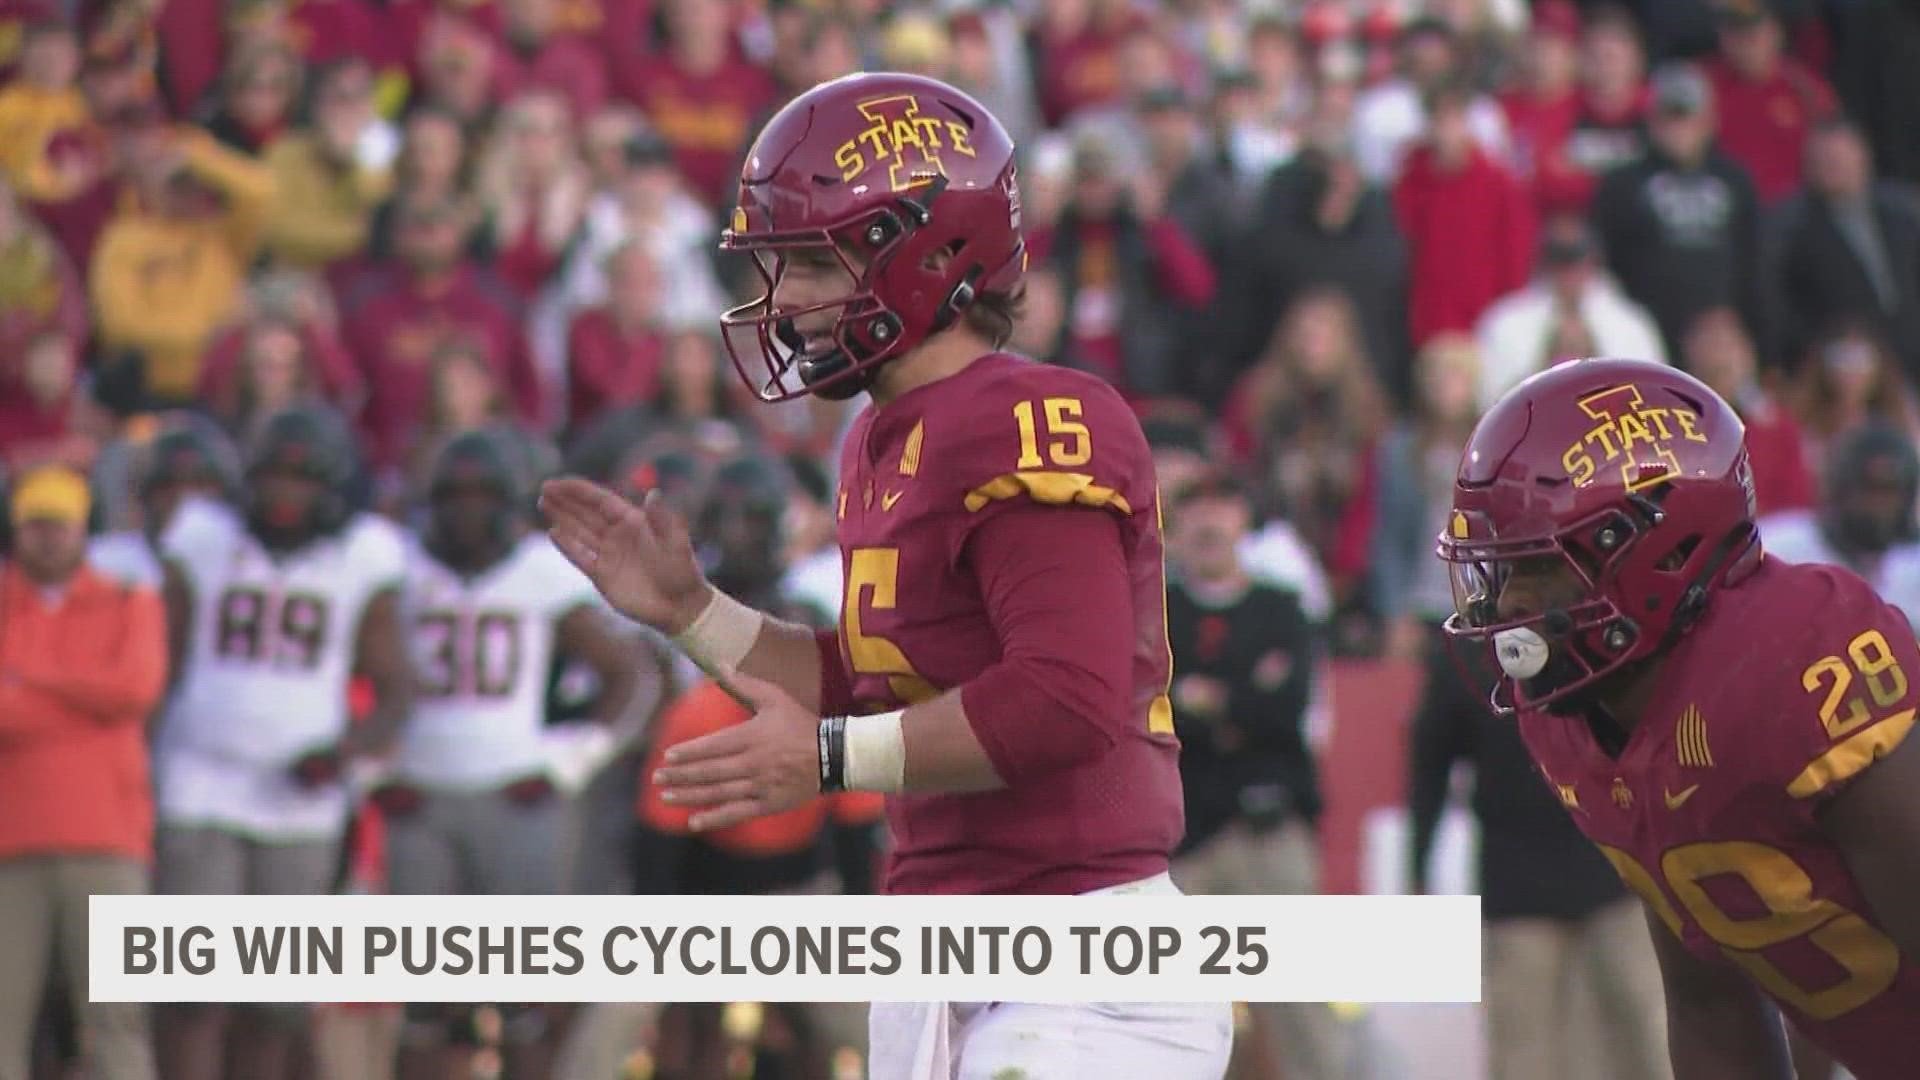 Iowa State is No. 22 in the latest poll and Saturday's win knocked Oklahoma State down from No. 8 to No. 15.